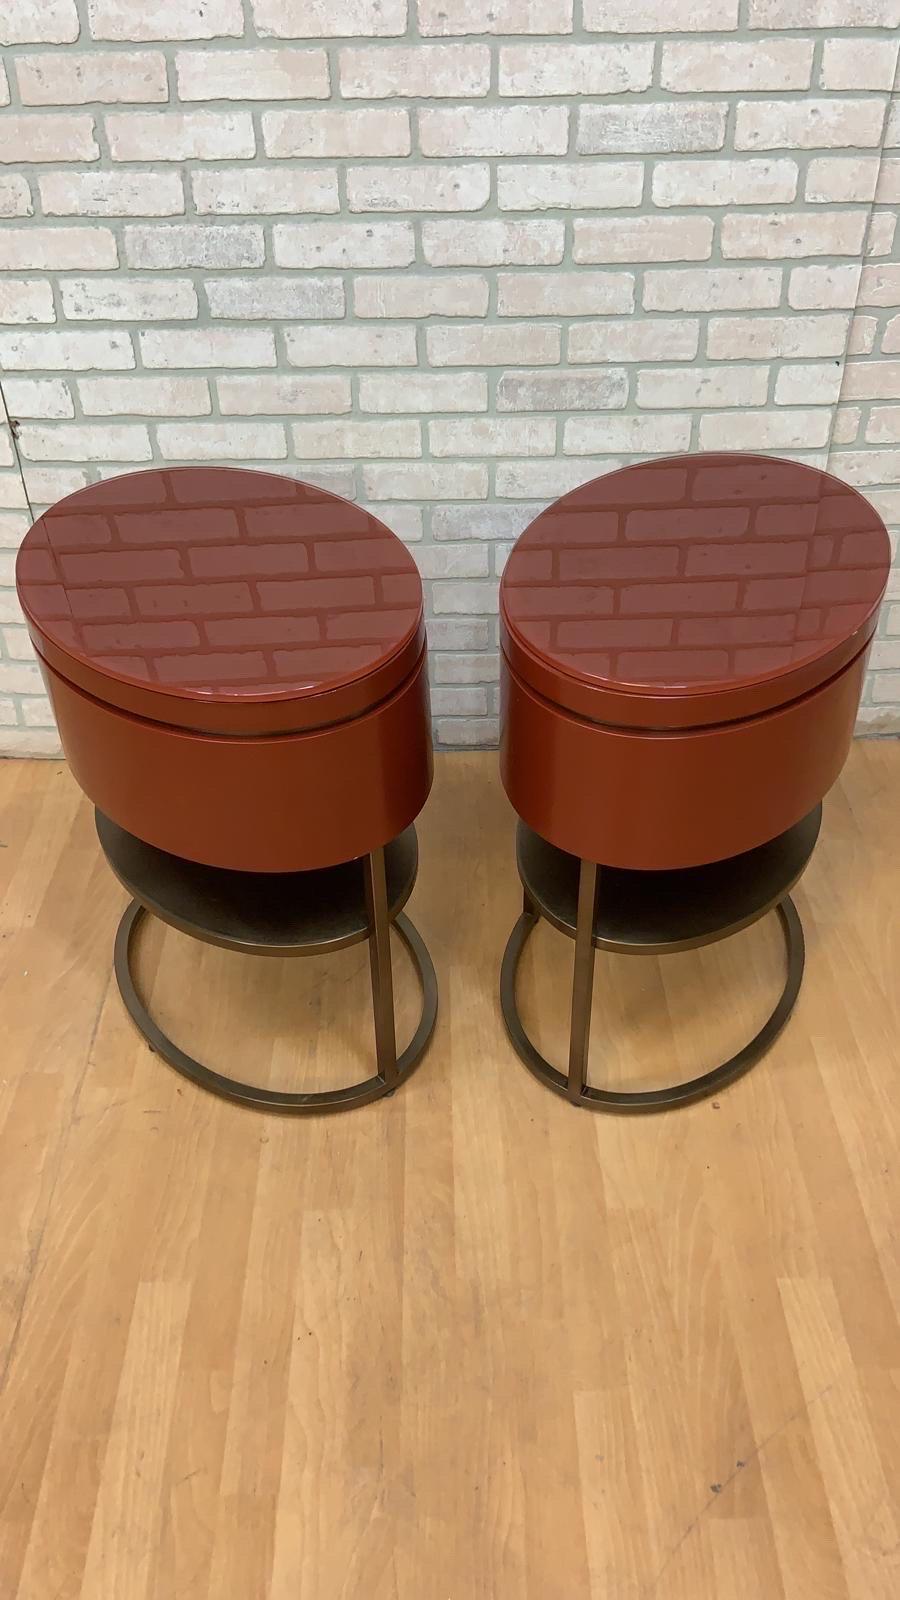 Lacquered Vintage Contemporary Custom Designed Oval Side Table/Night-Stands - Pair For Sale